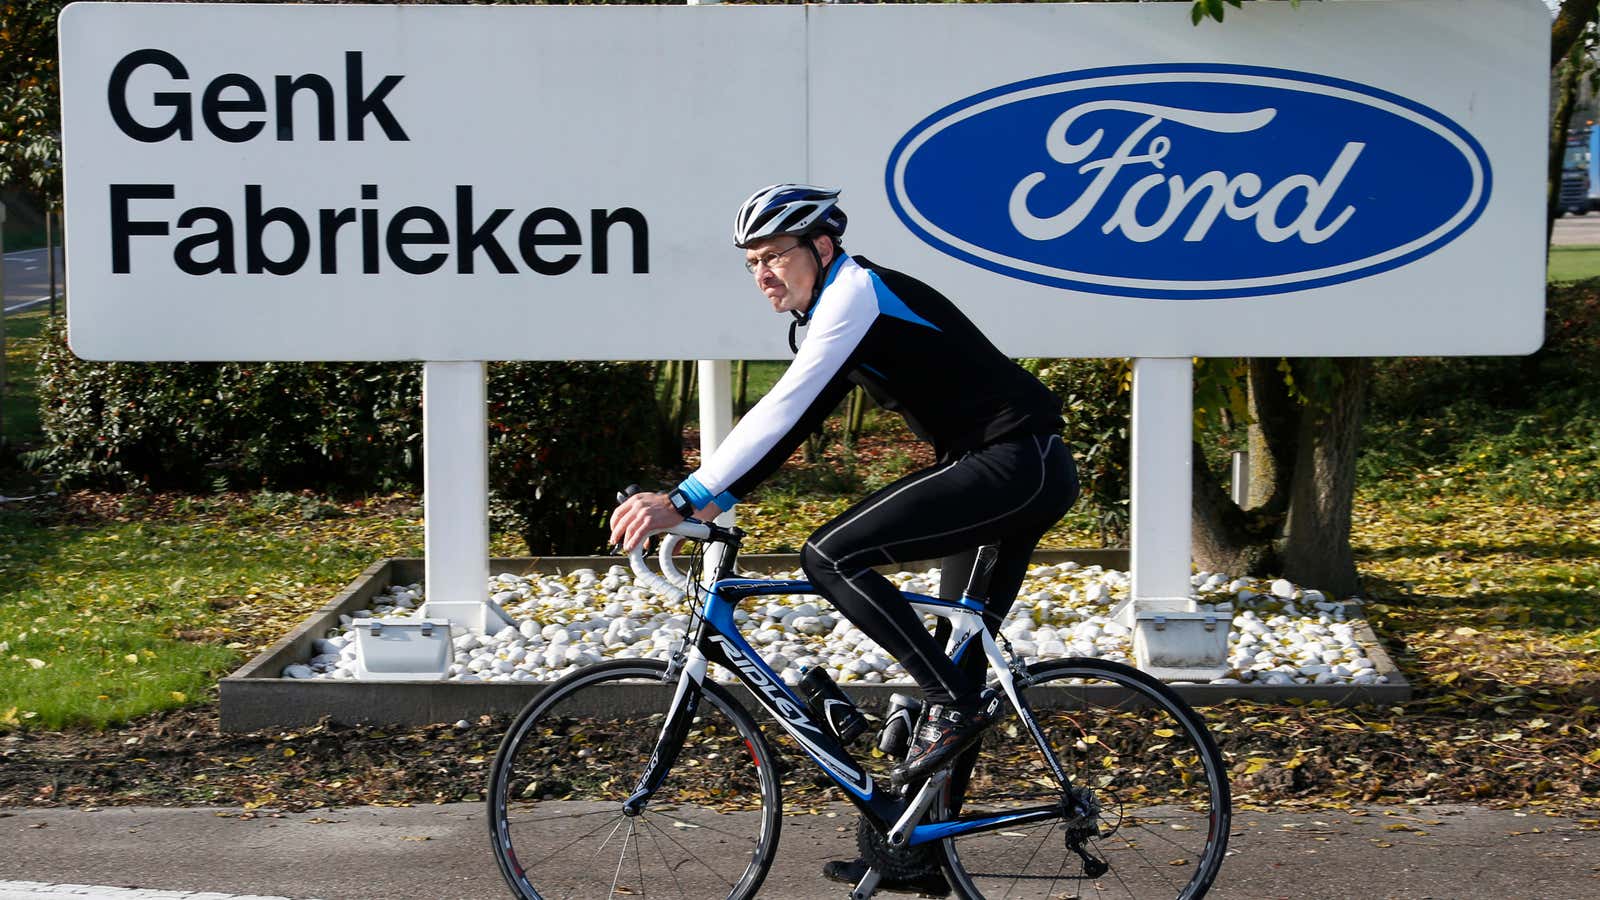 Discount all you want, Ford. I’m sticking to my bike.